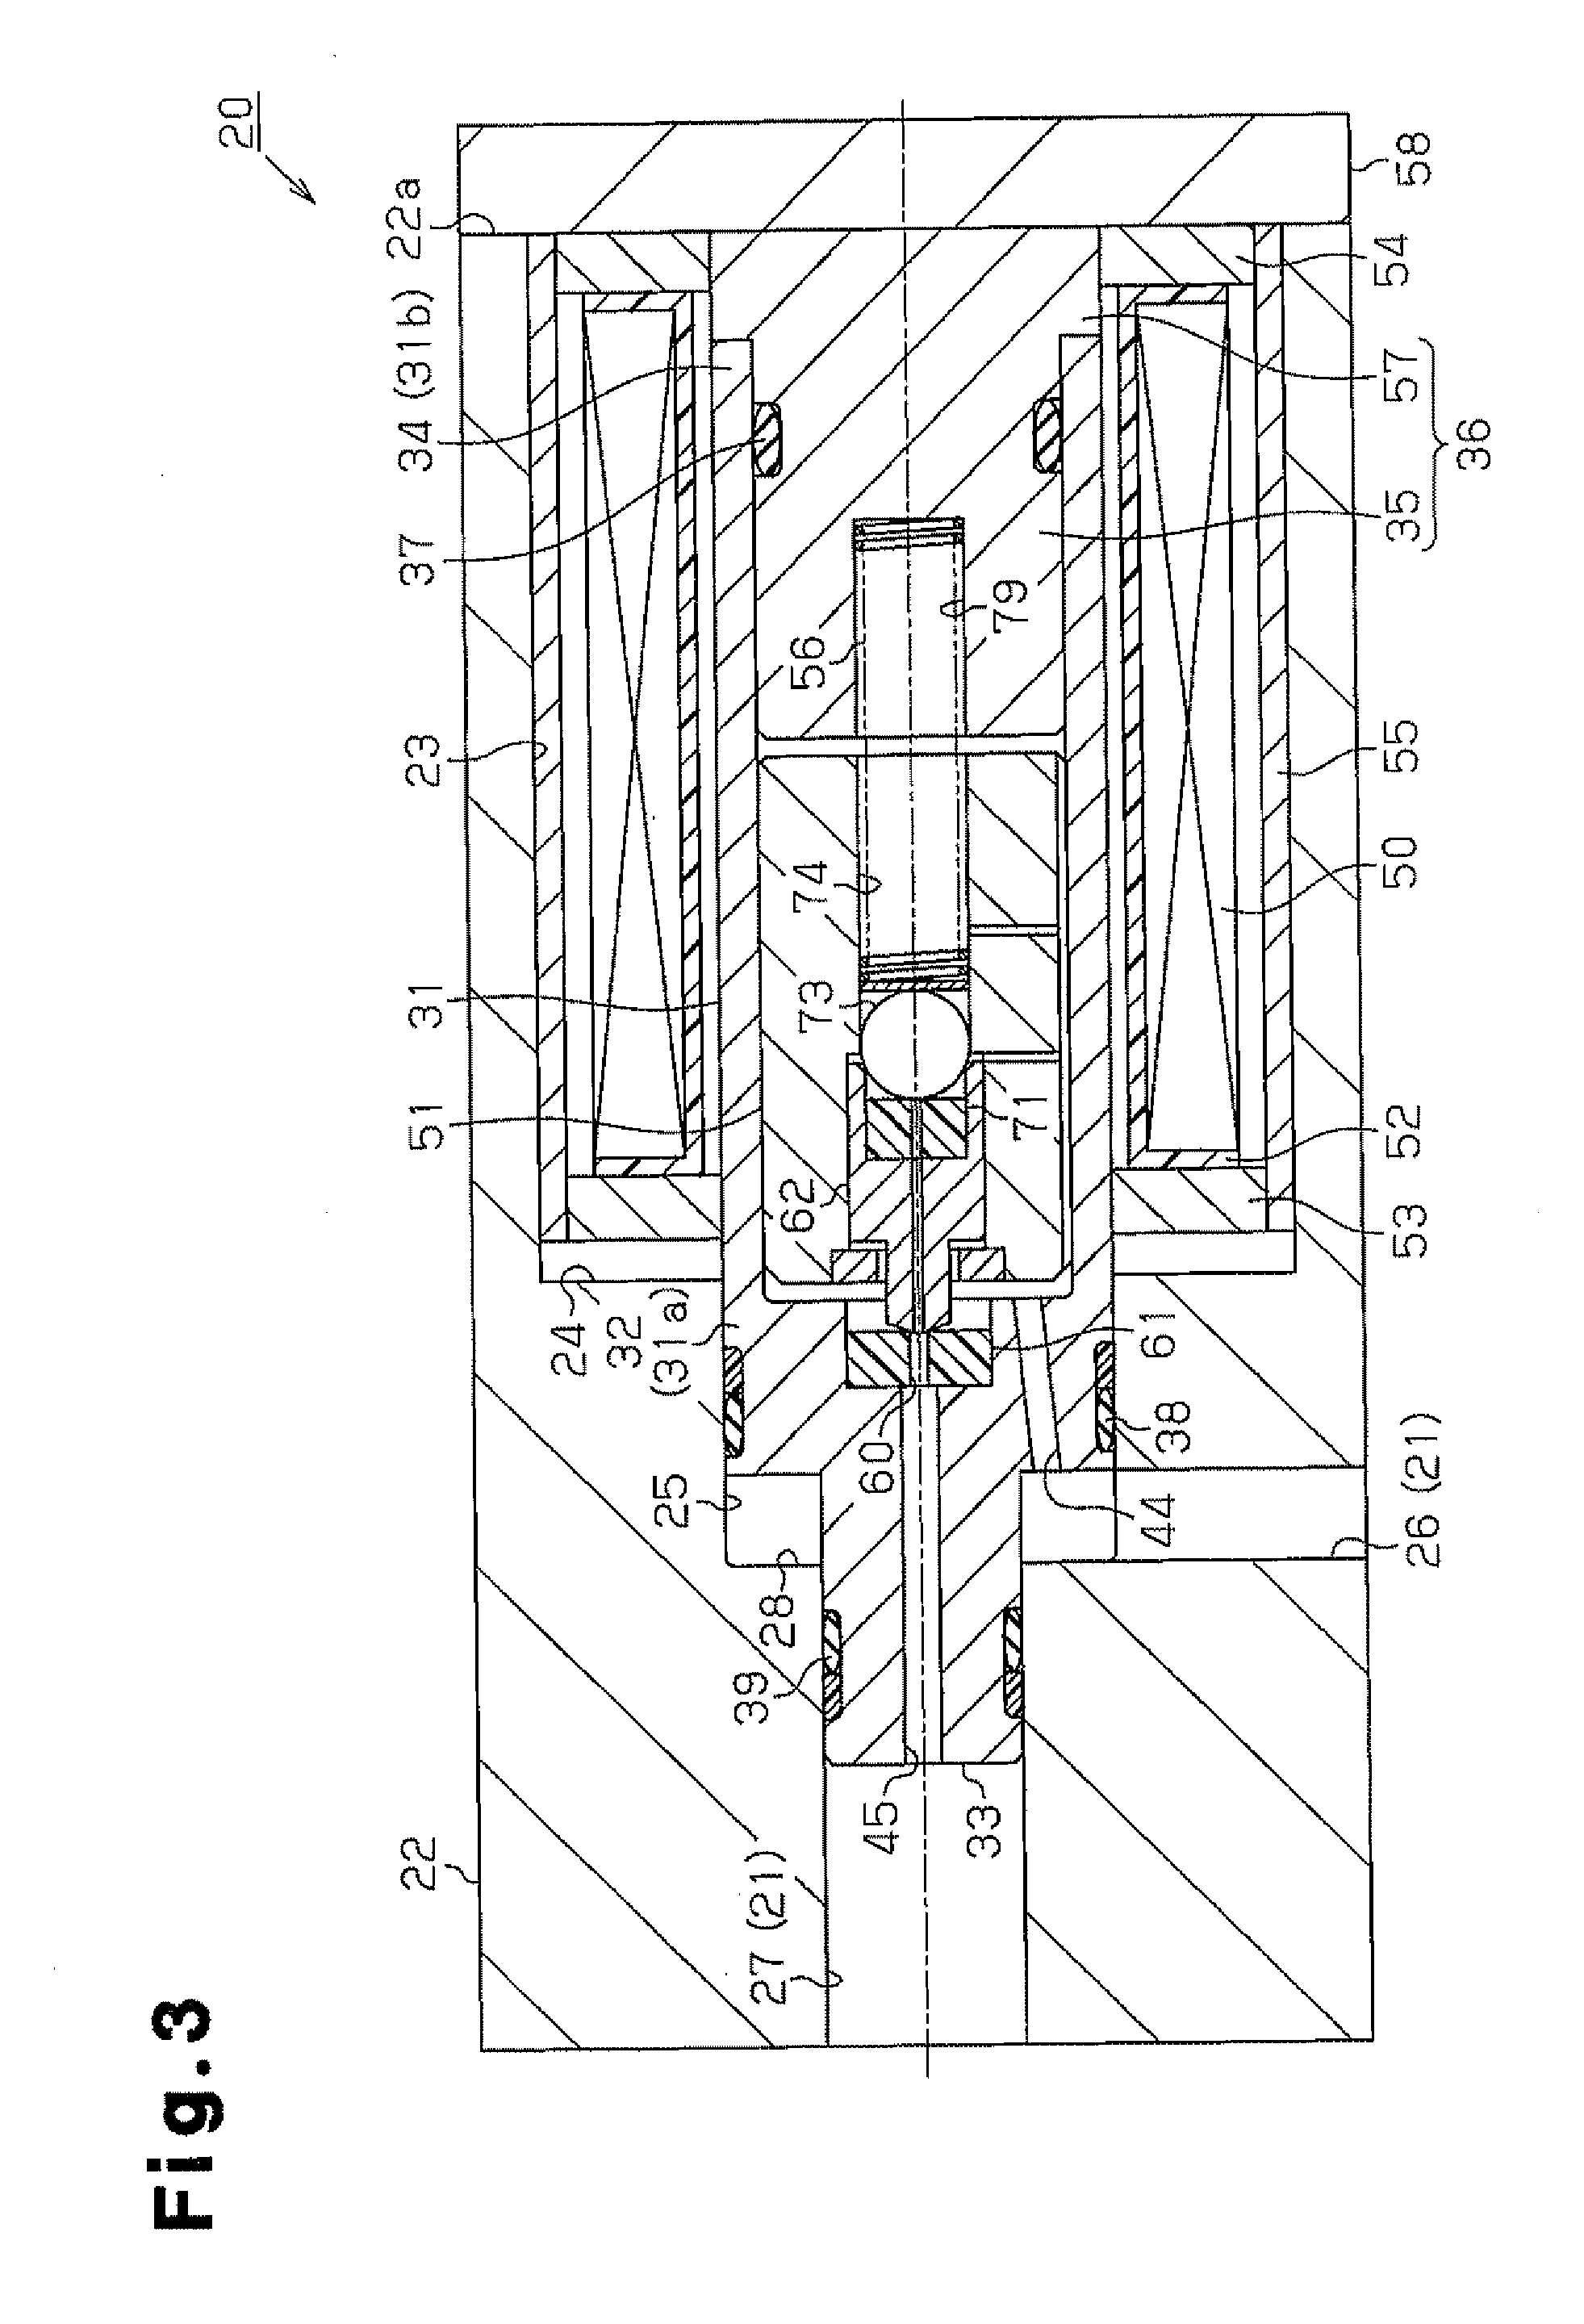 Safety valve and electromagnetic valve